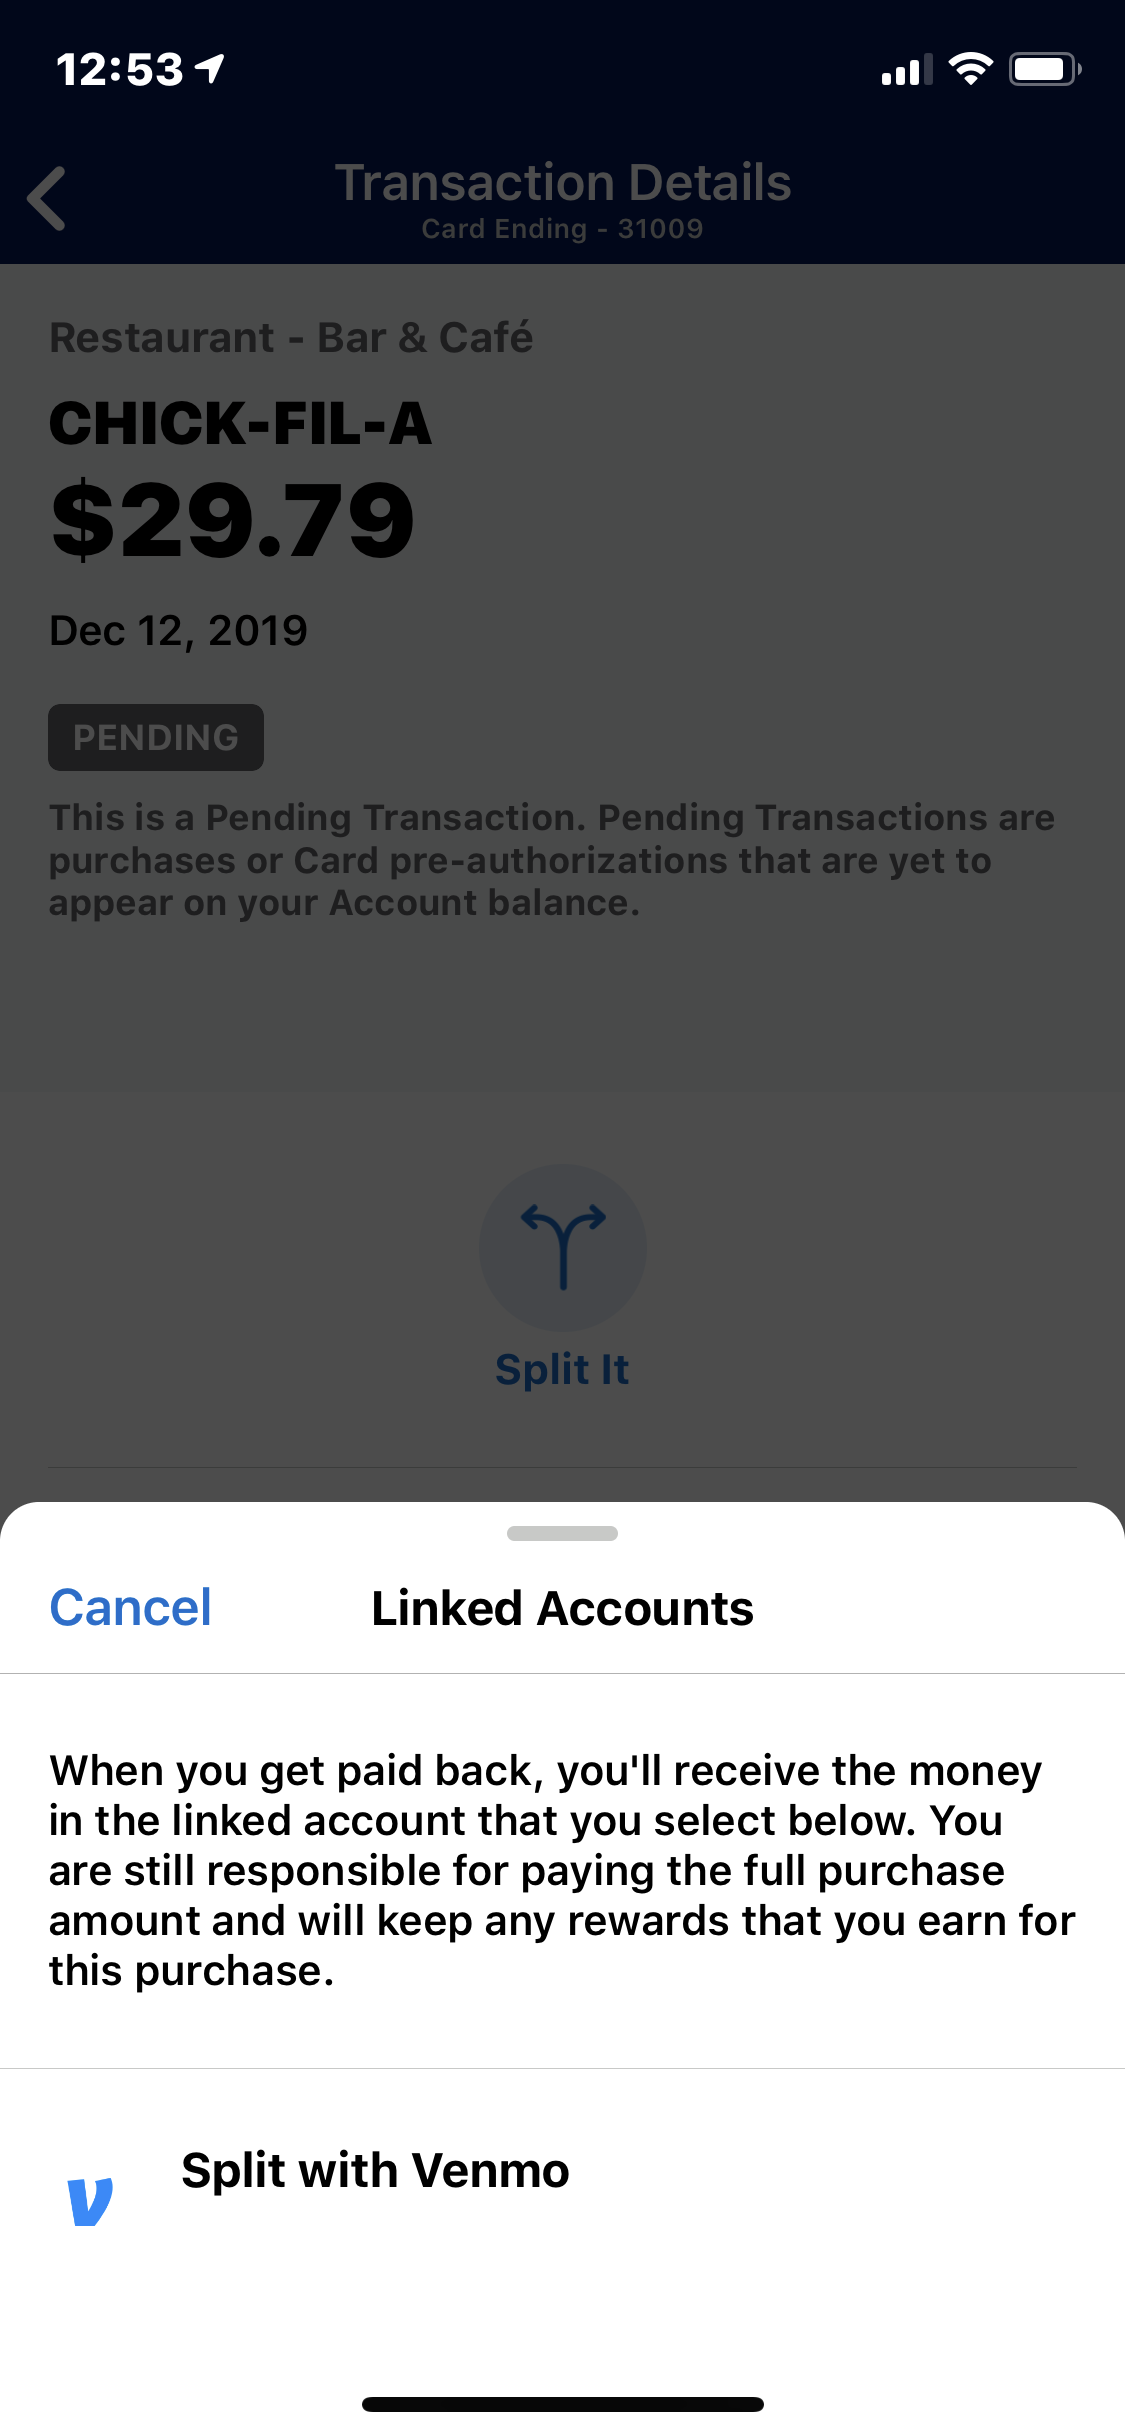 Amex split pay feature: Useful for sharing costs in big groups